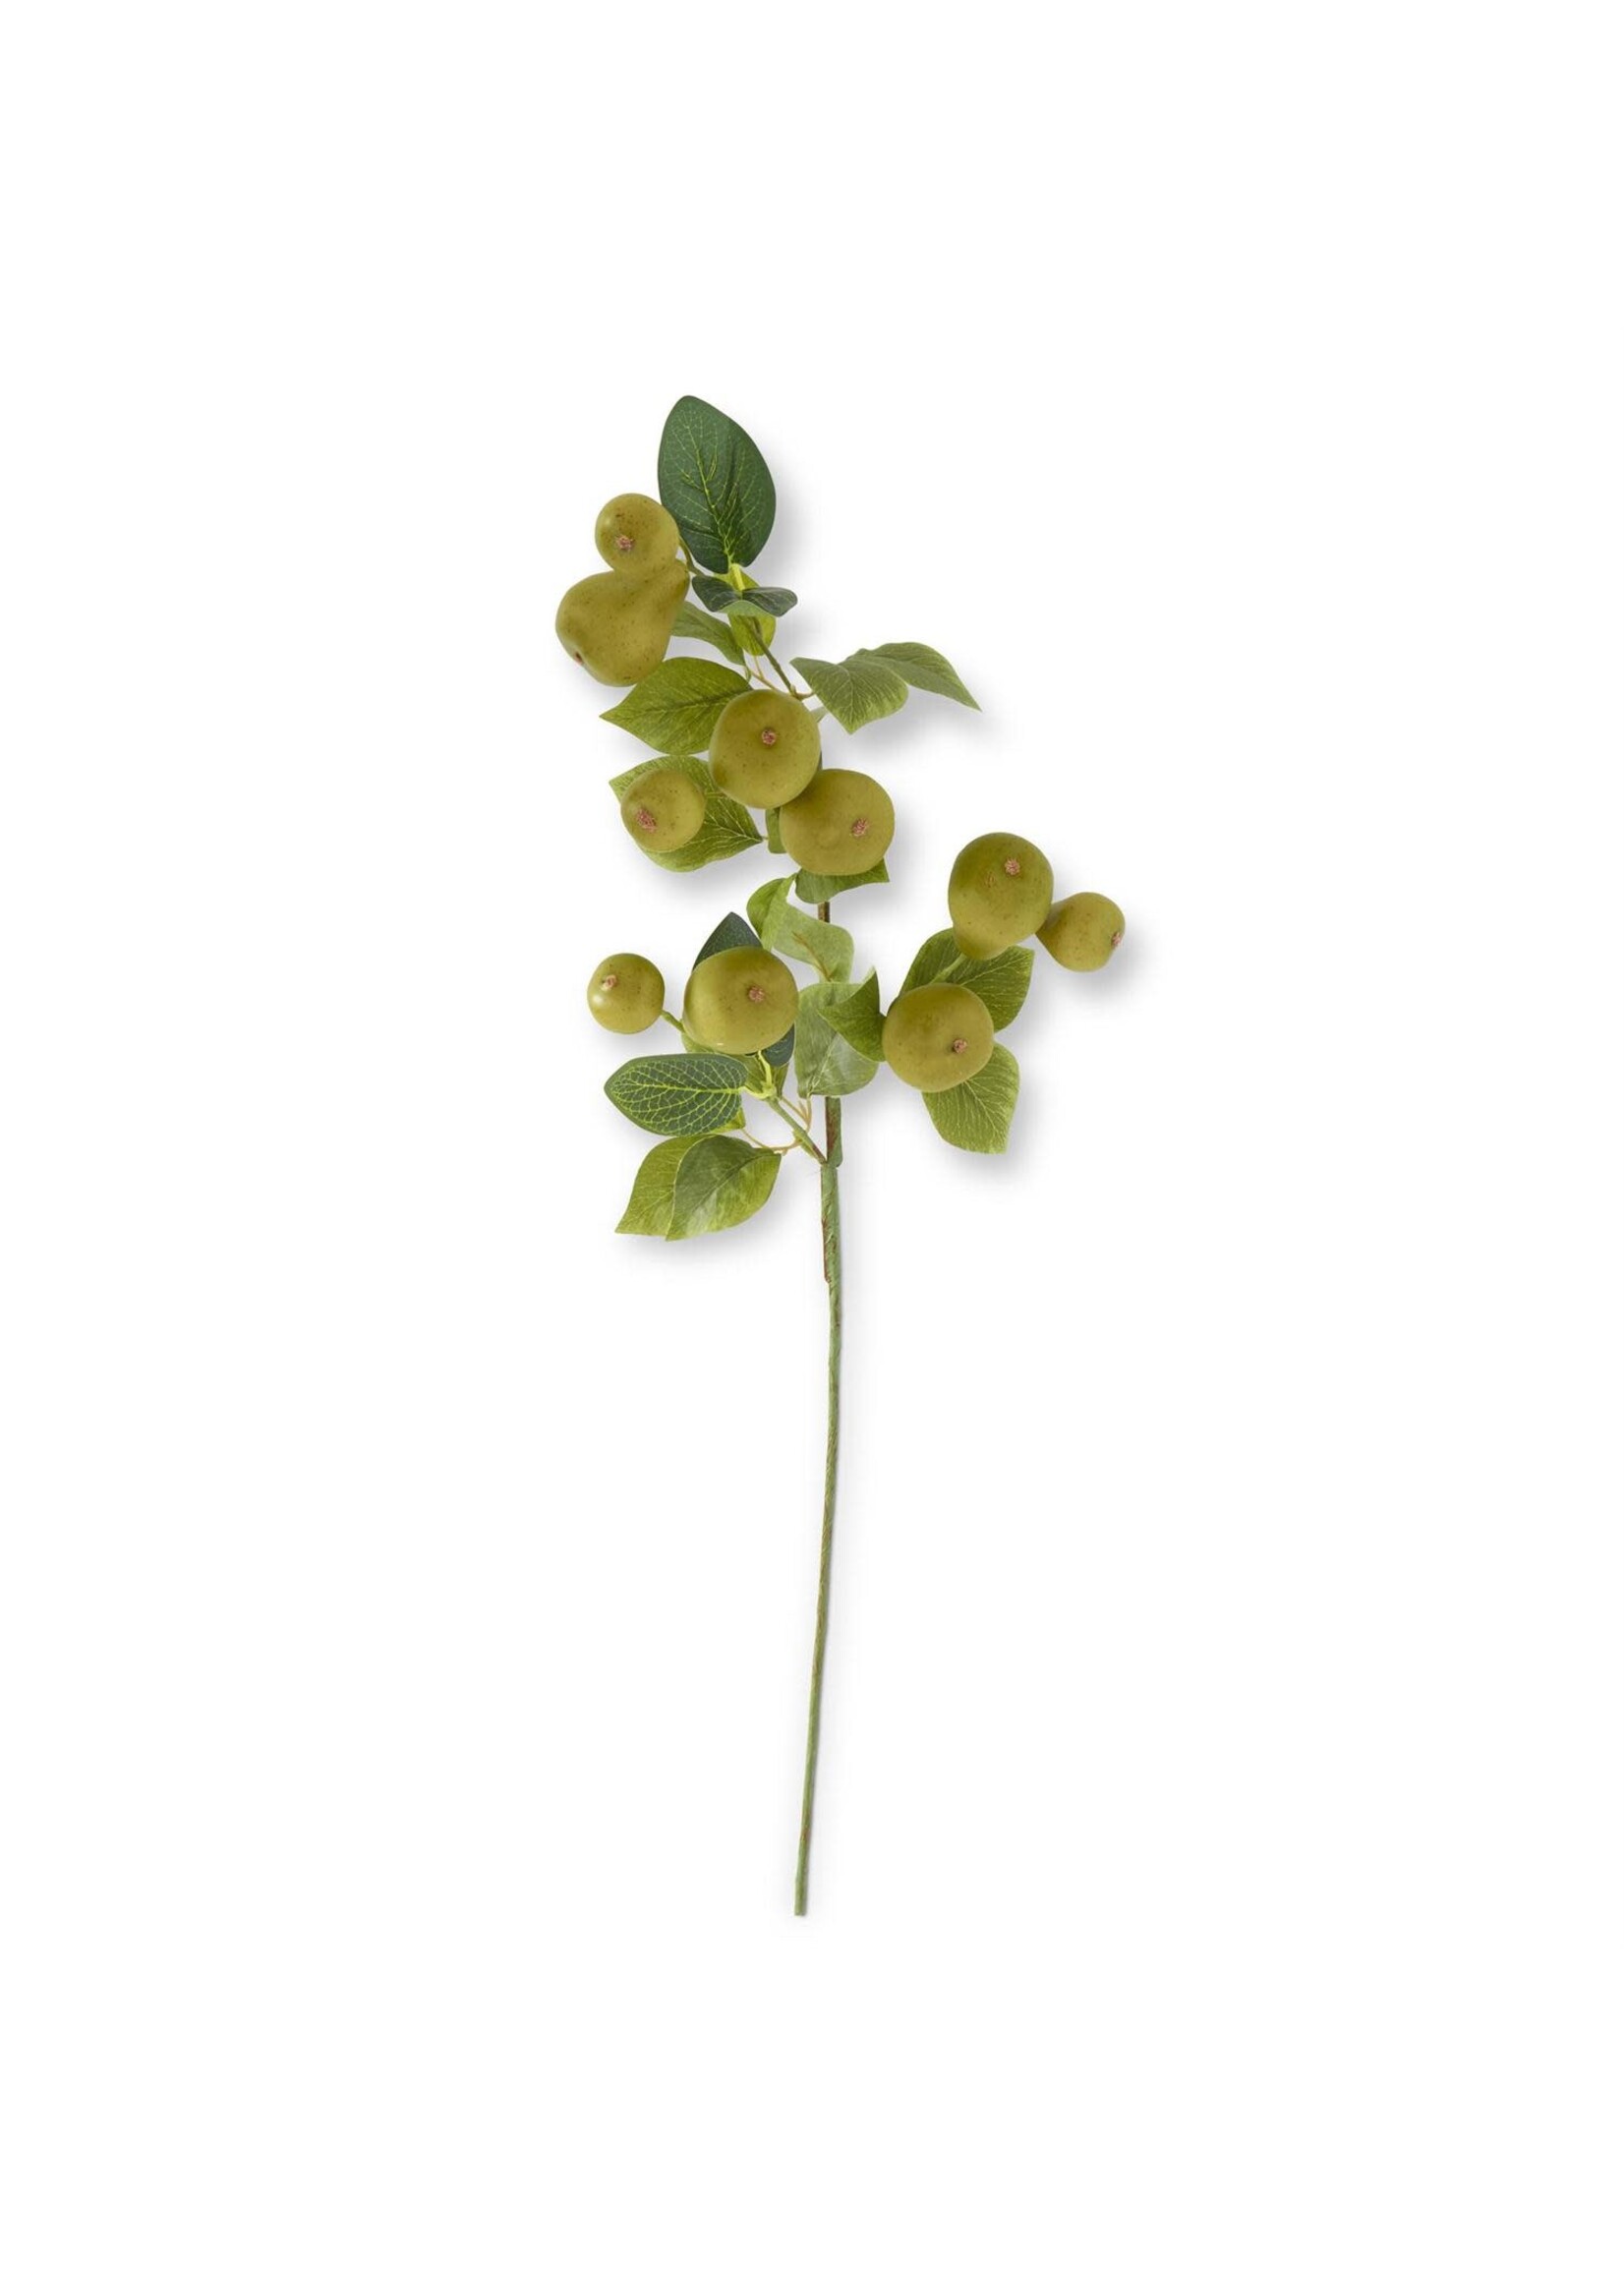 31 Inch Green Speckled Pear Stem